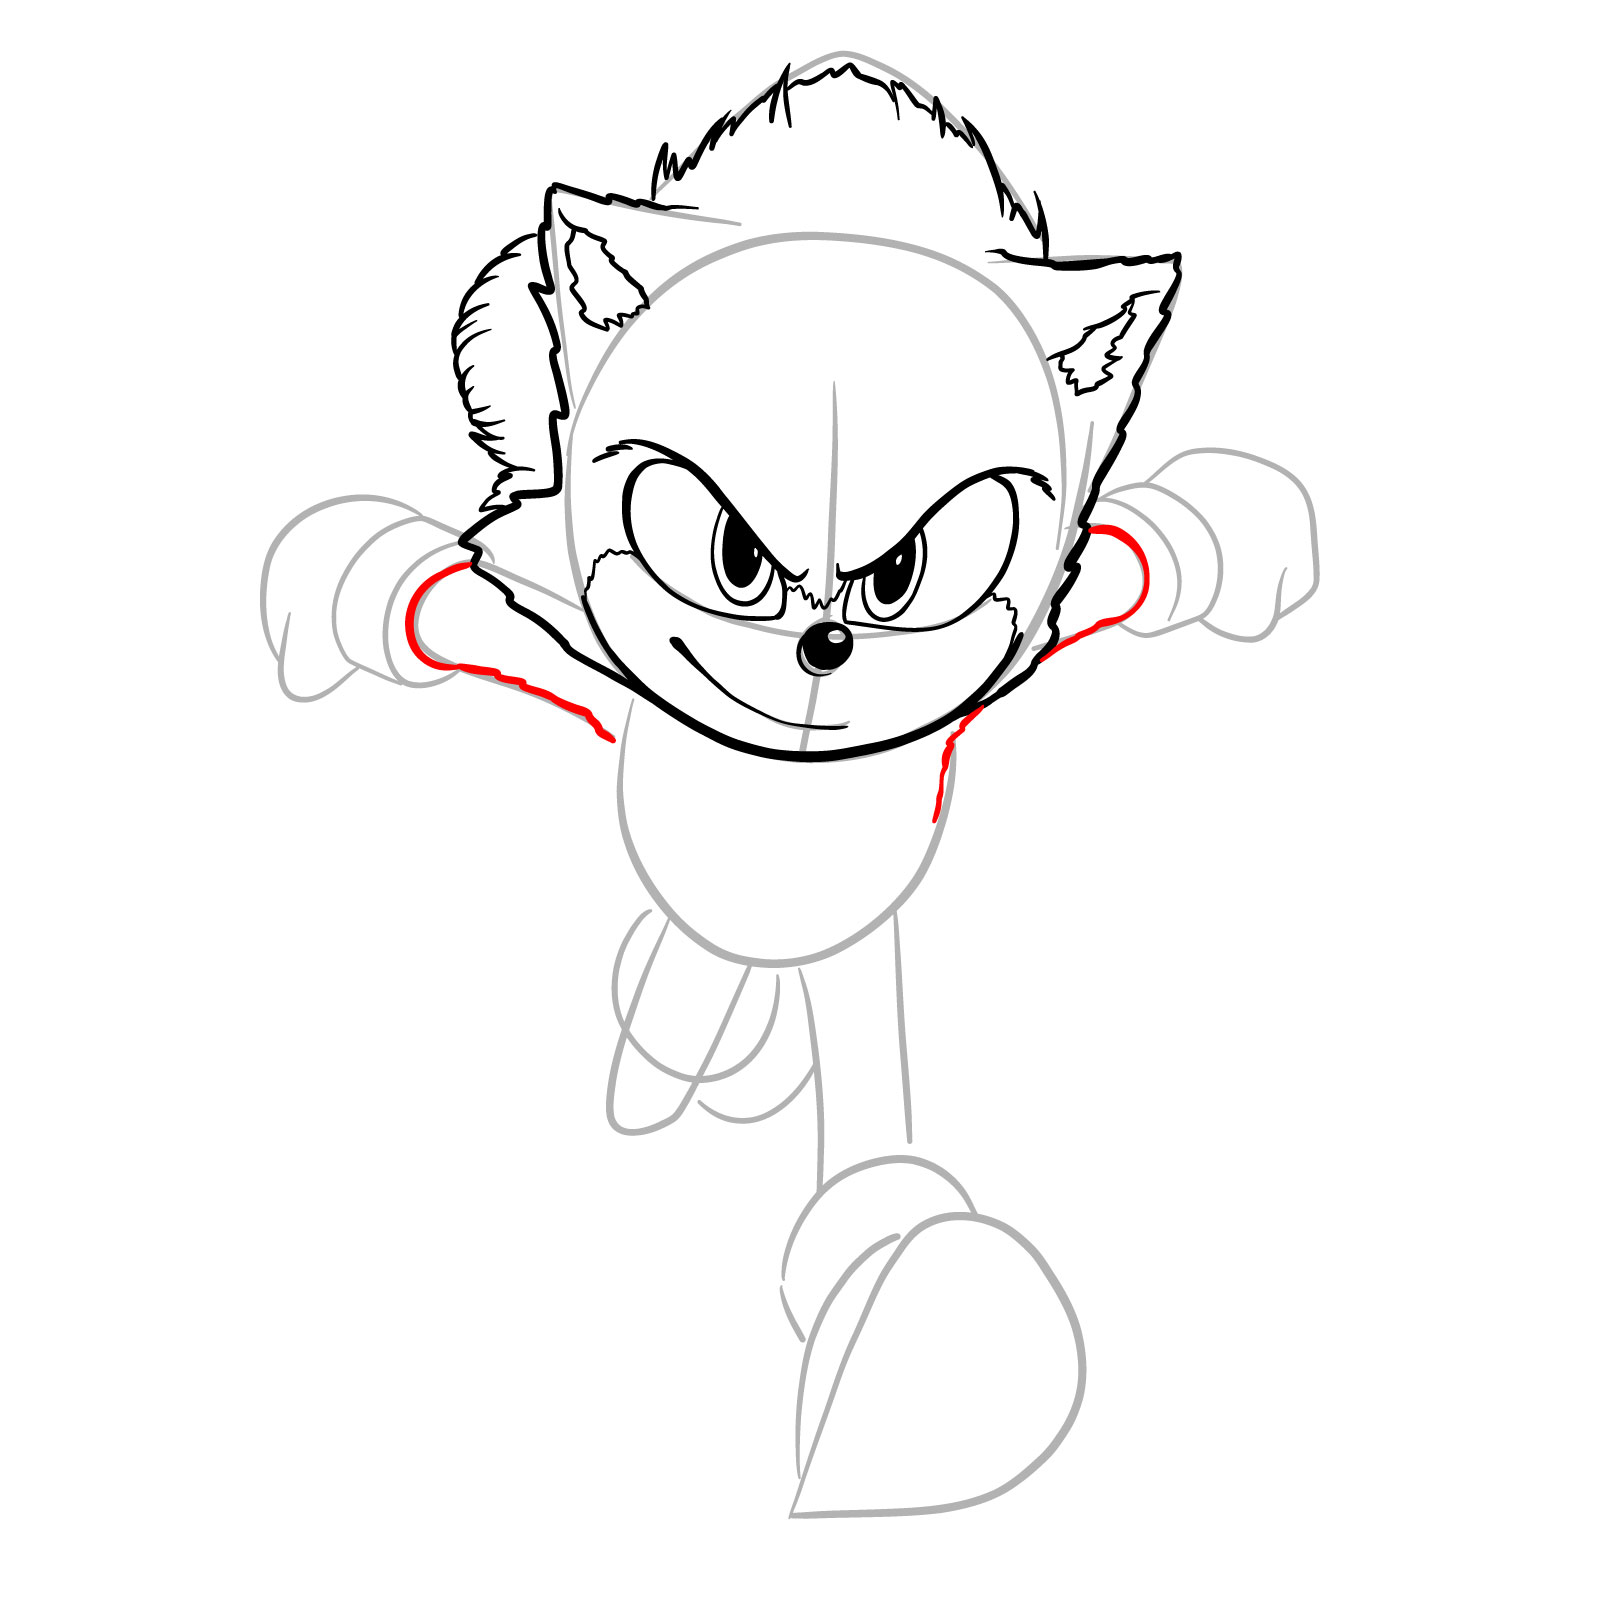 How to draw Sonic from the movie - step 15